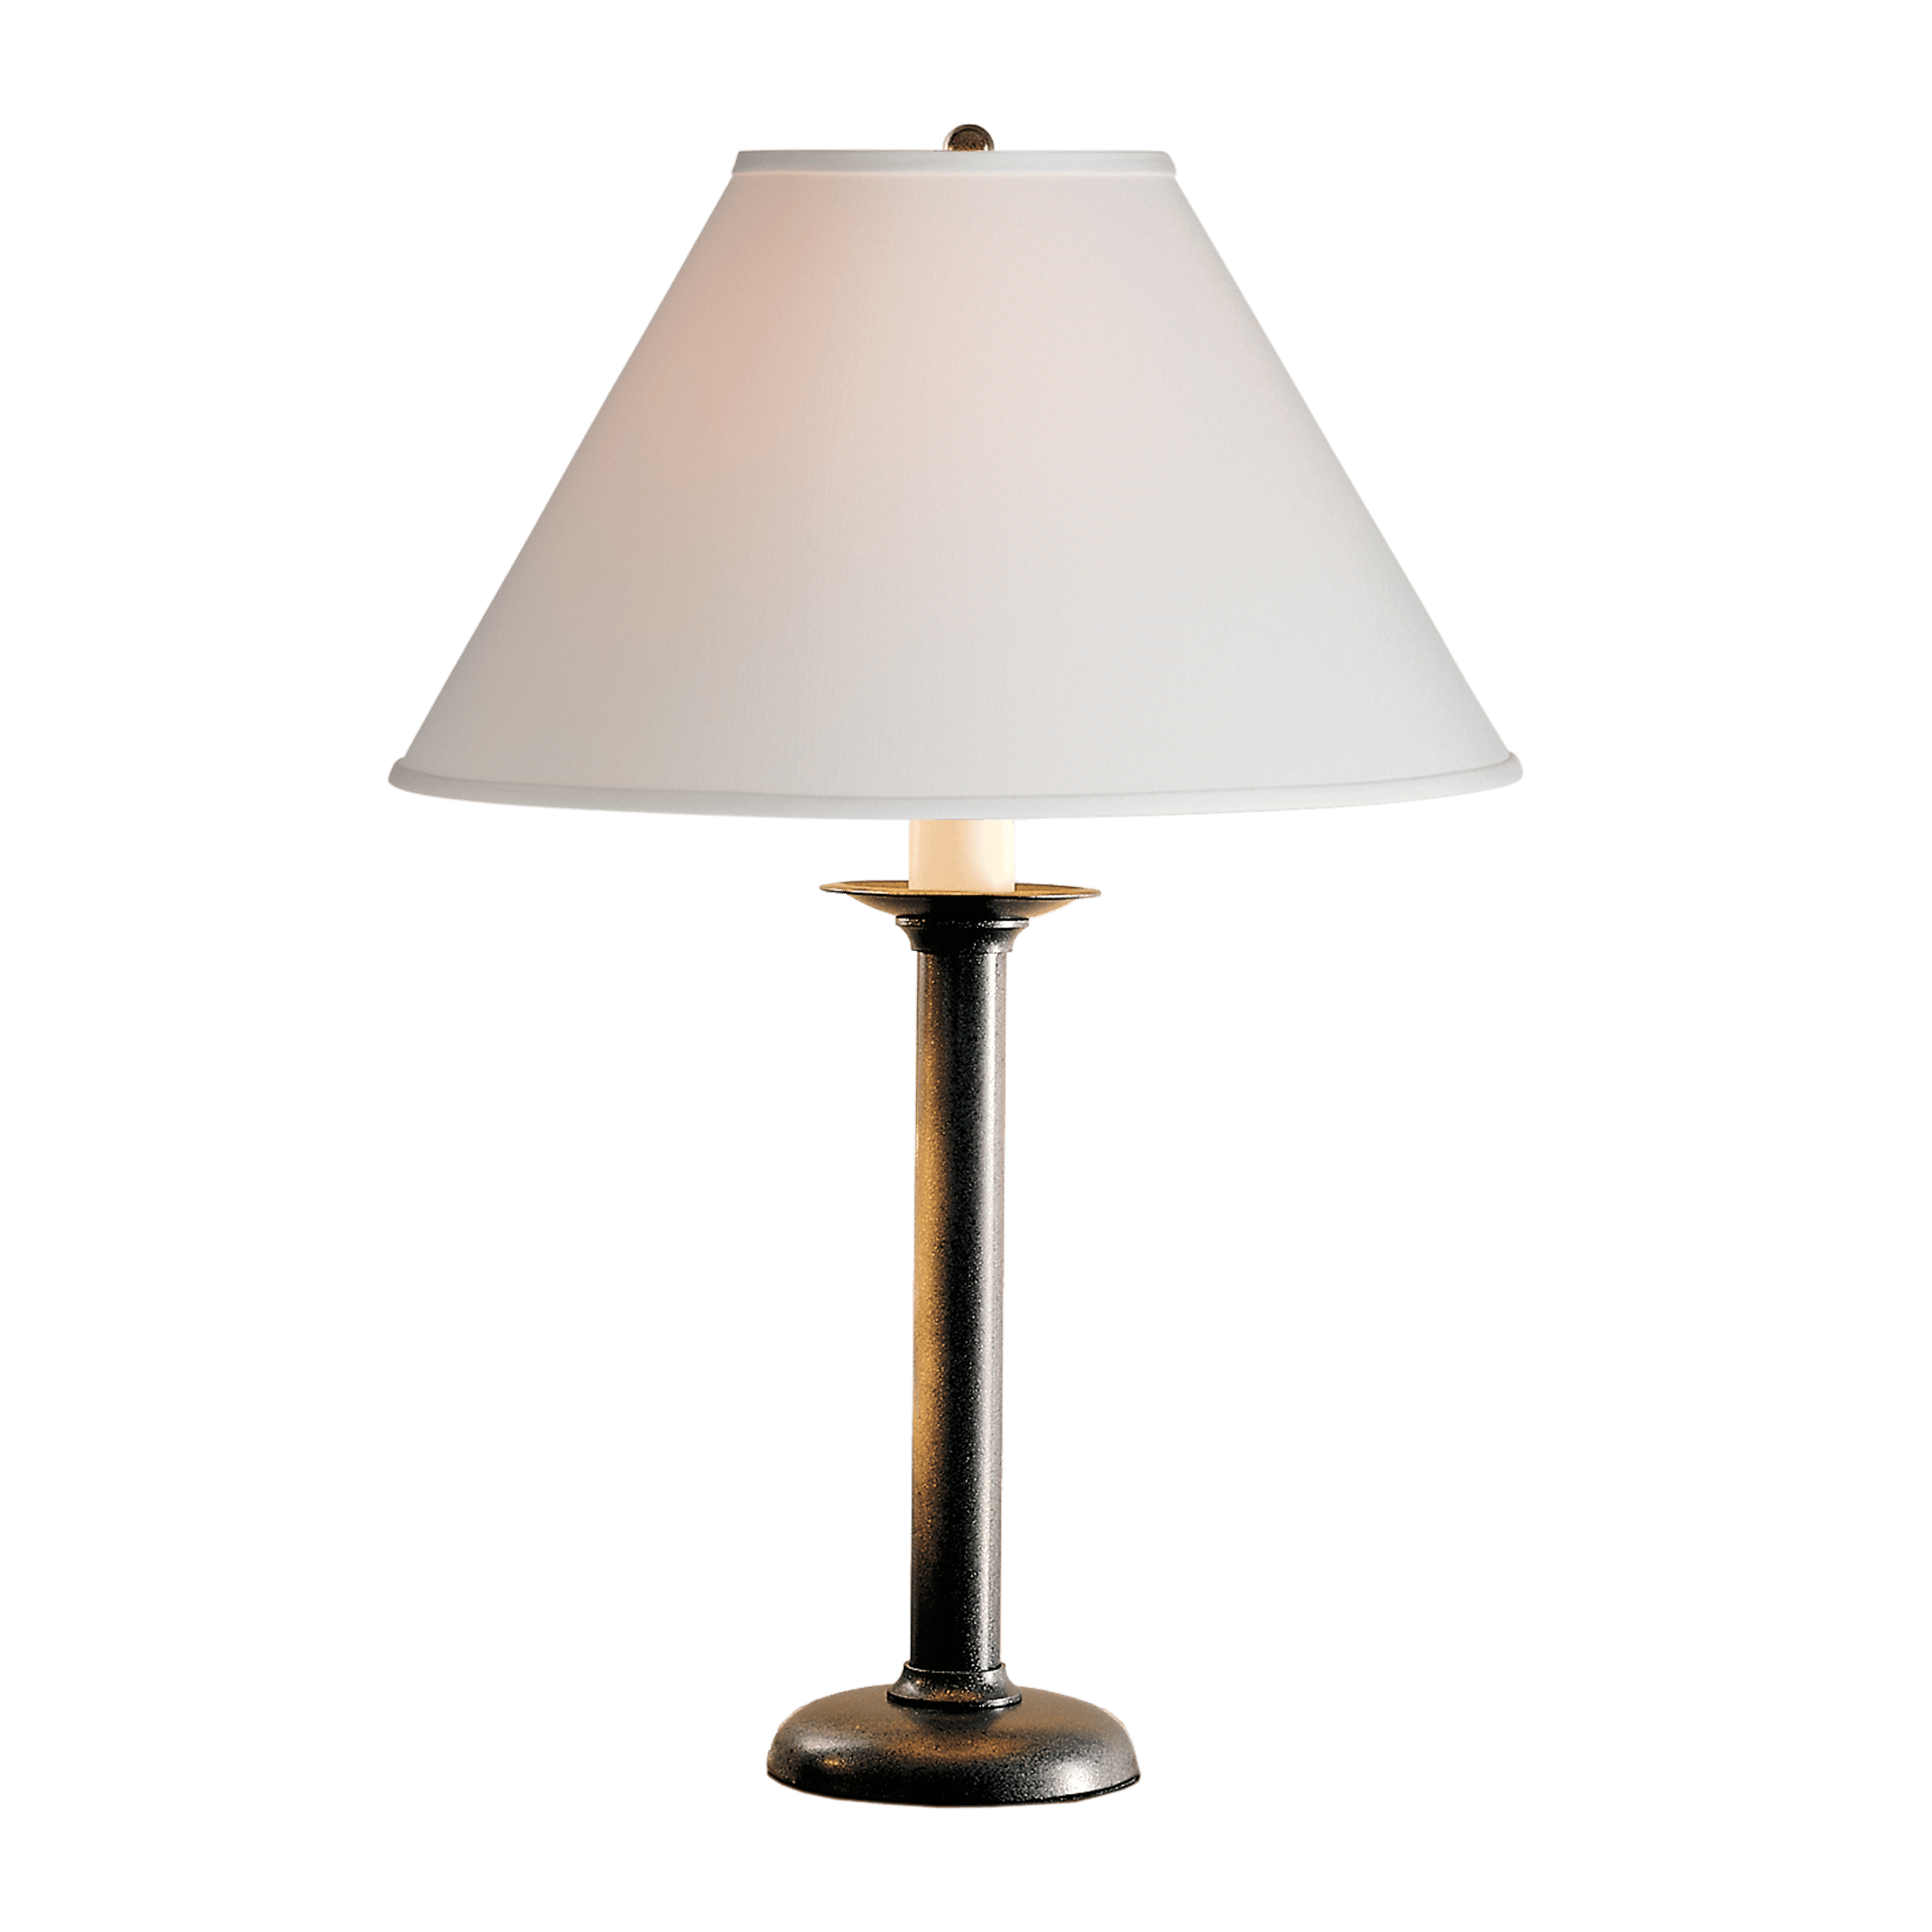 Bankers Lamp SMALL, Antique Brass finish & opal glass shade